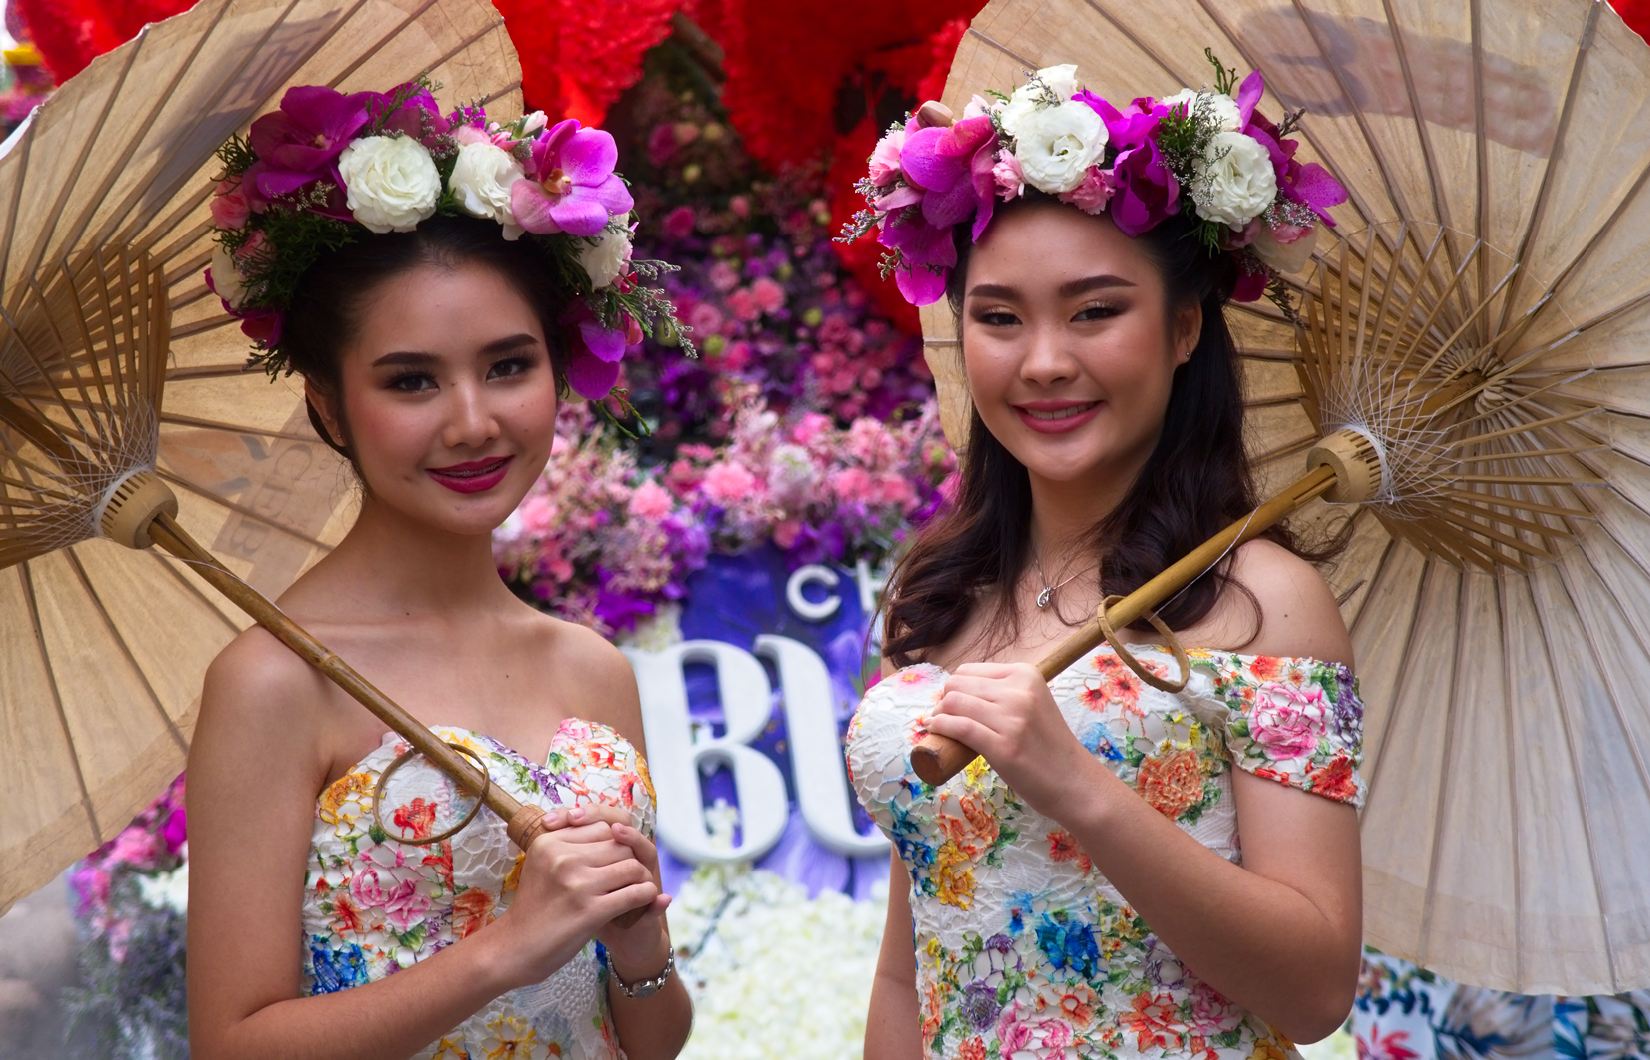 Your MustVisit List of Events and Festivals in Thailand in 2019